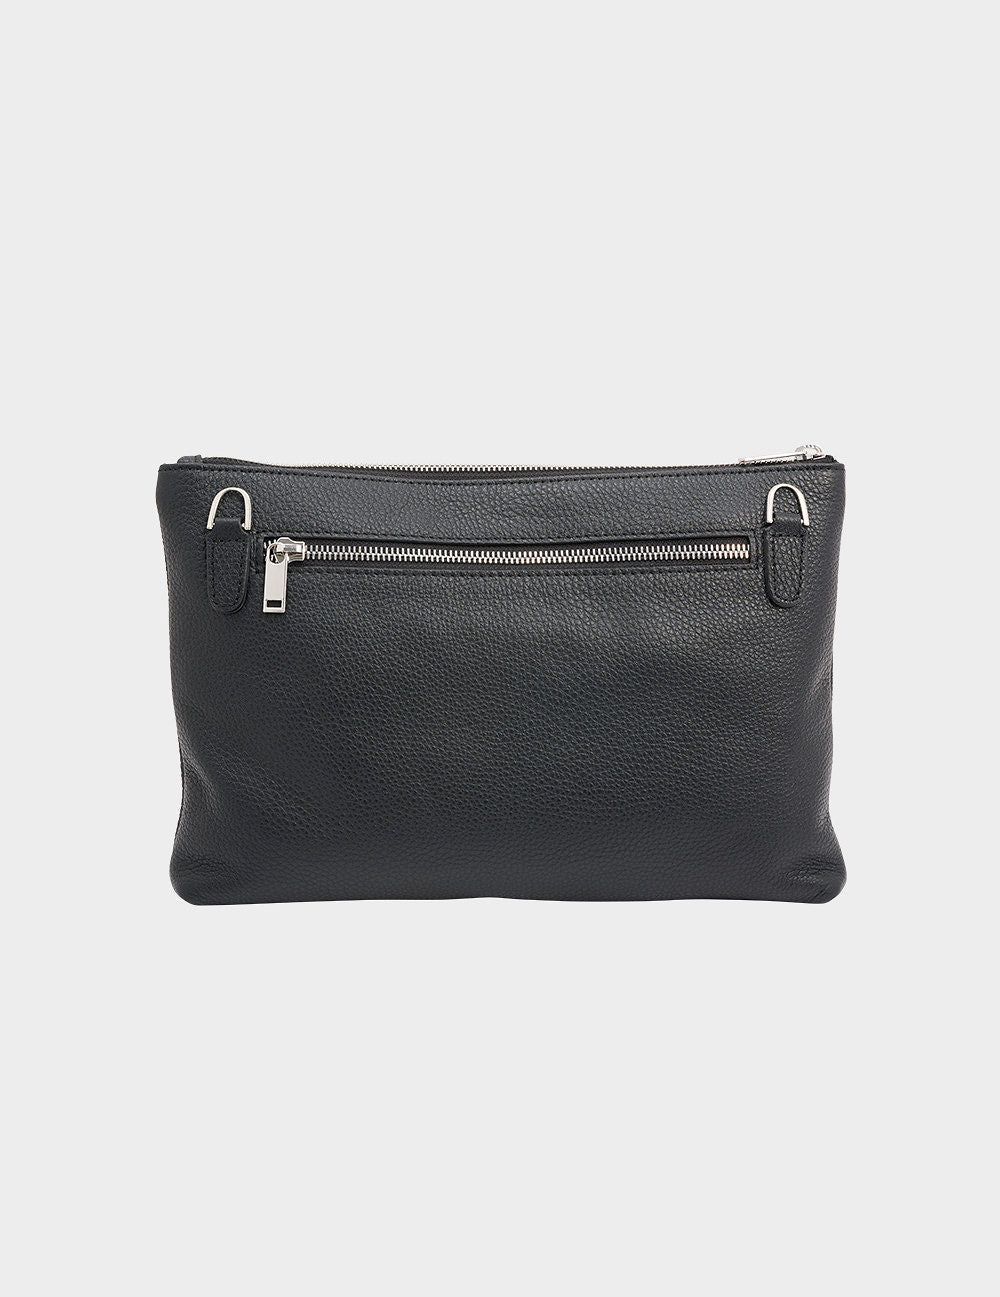 FLOATER LEATHER SIGNATURE CLUTCH BAG